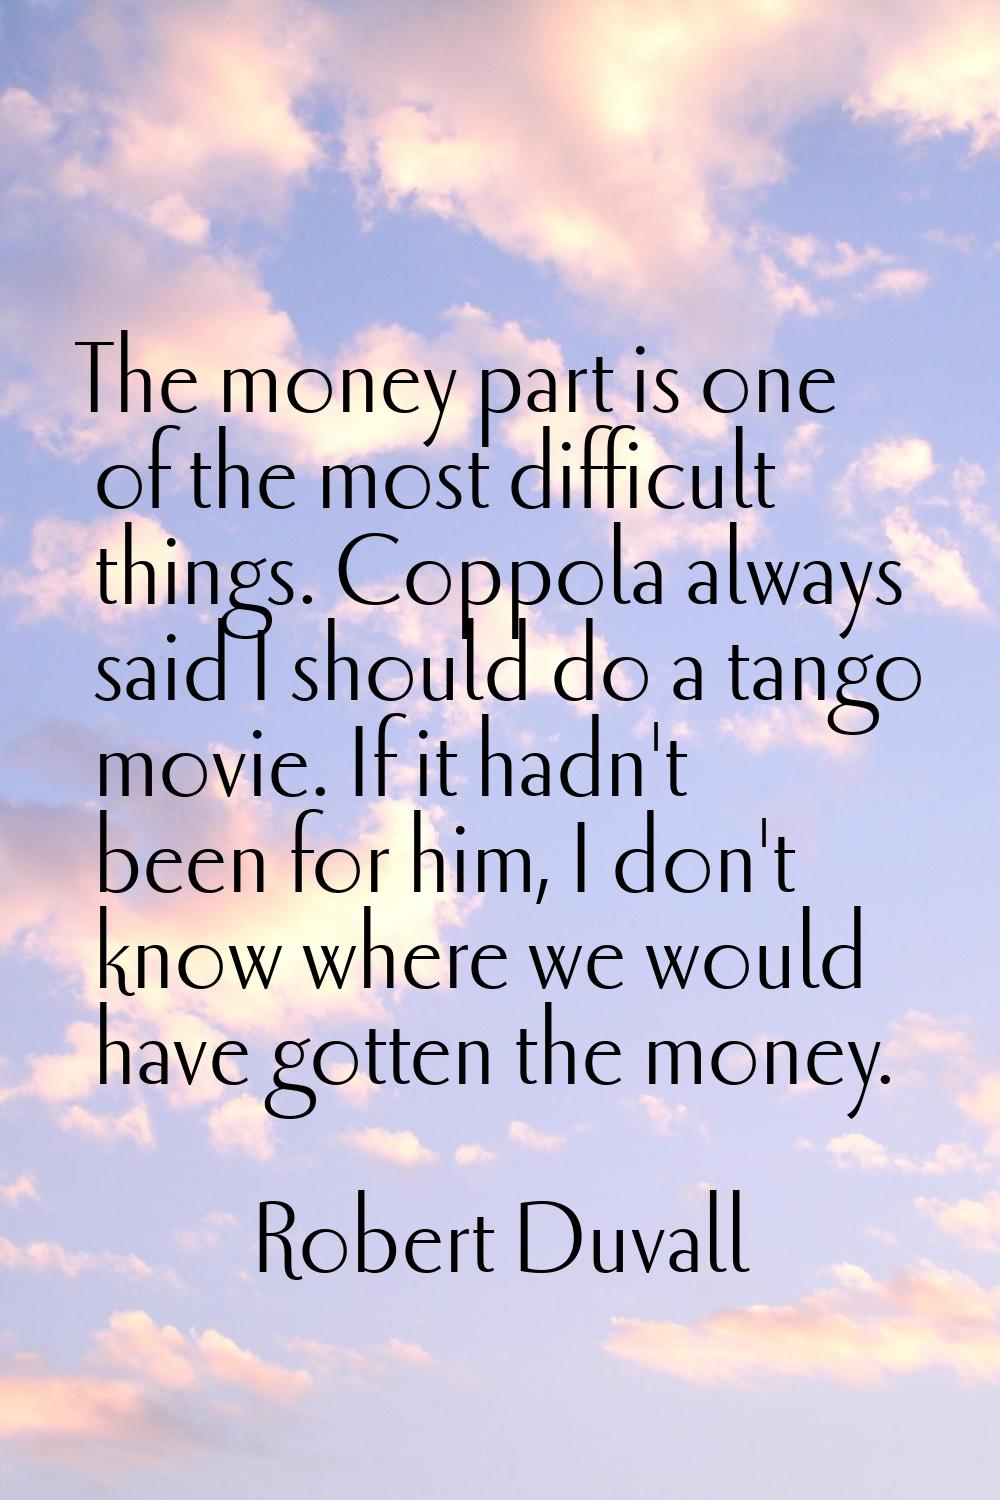 The money part is one of the most difficult things. Coppola always said I should do a tango movie. 